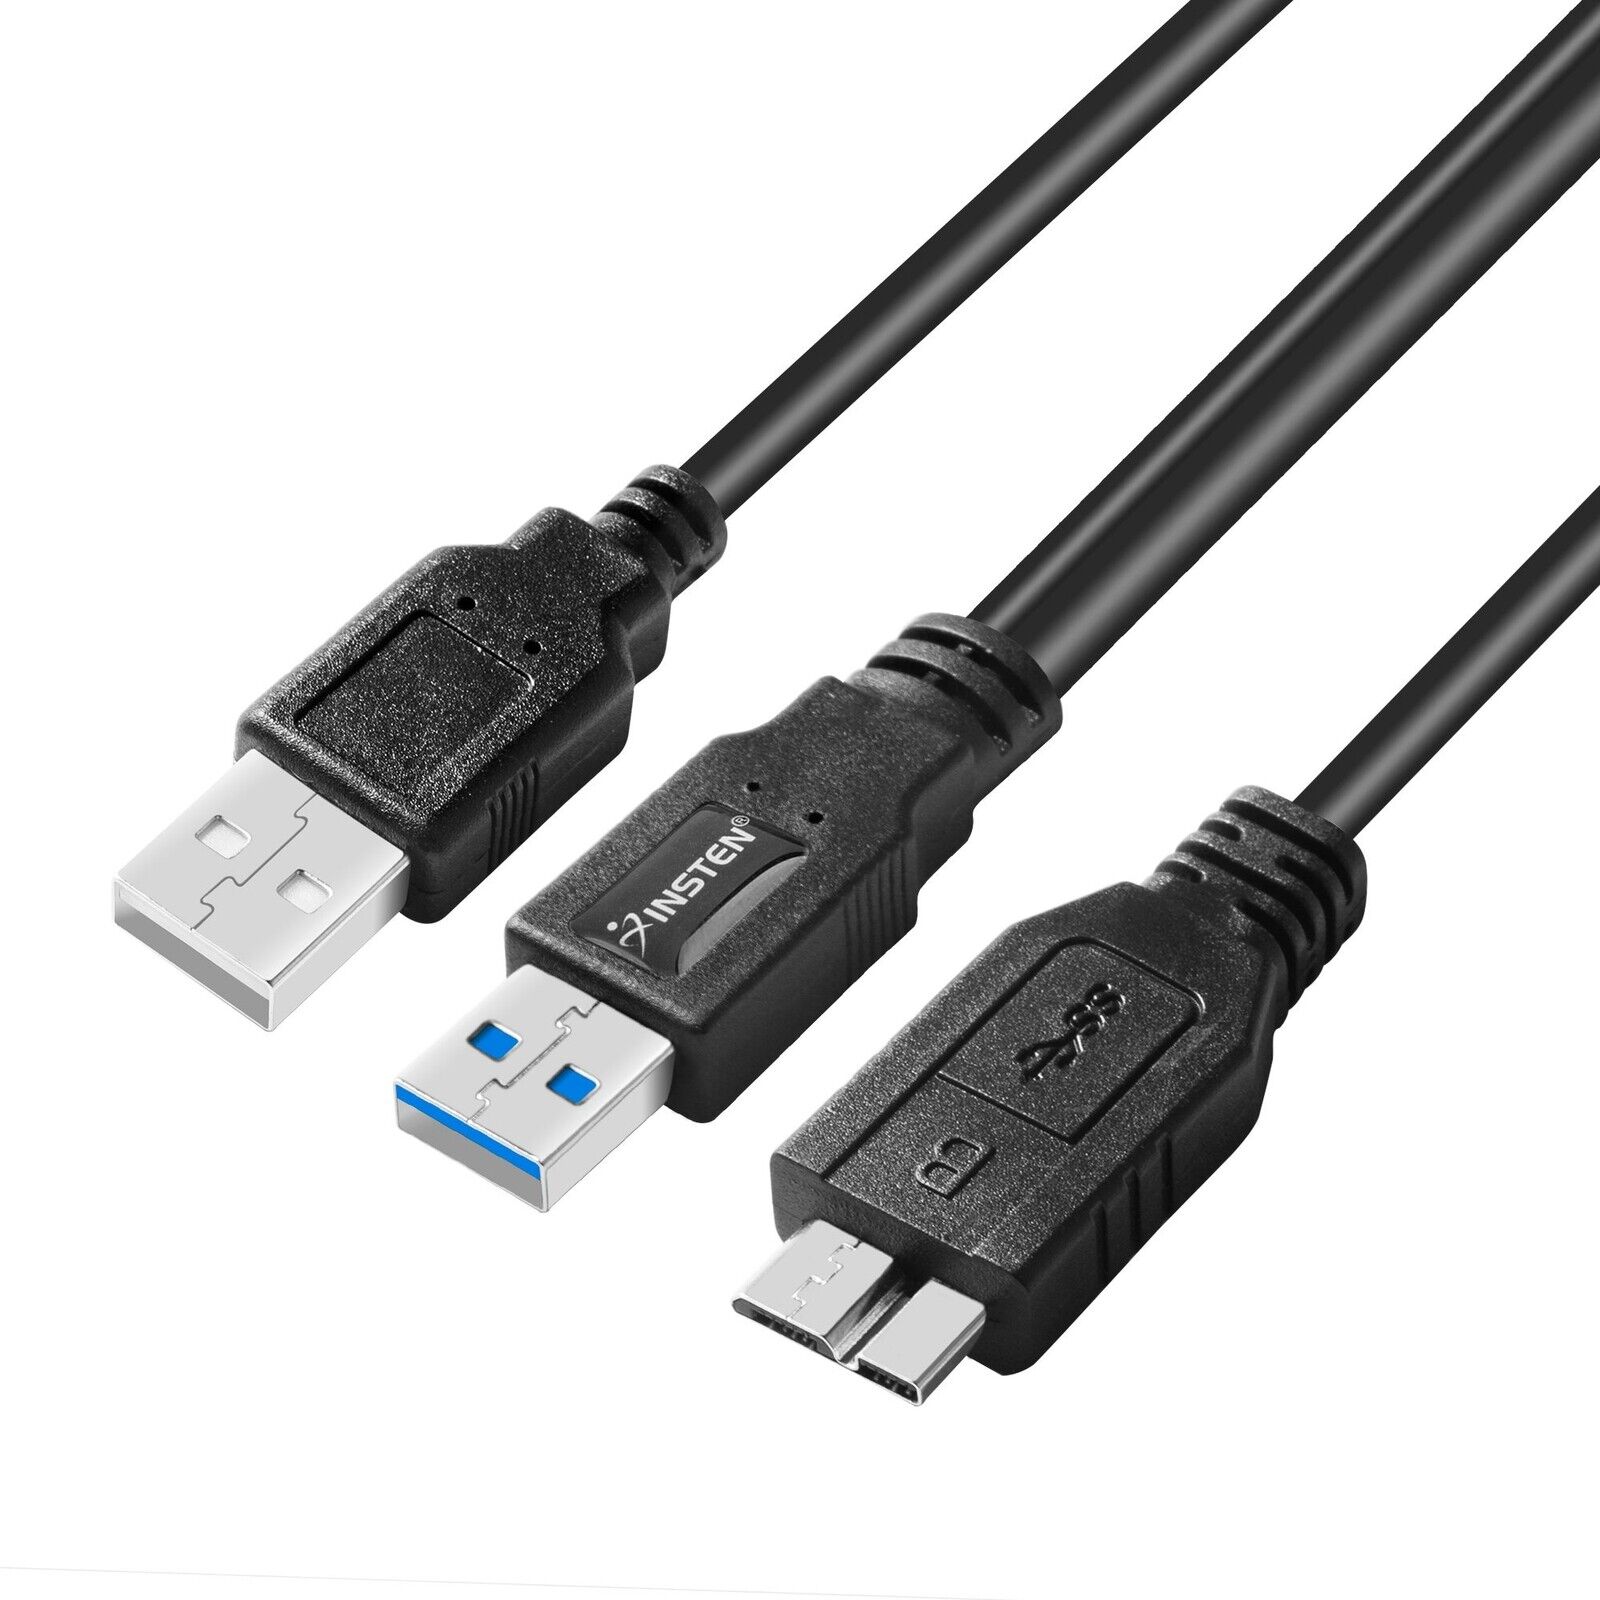 Insten Dual USB 3.0 Type A to Micro-B USB Y Shape Cable for External Hard Drives